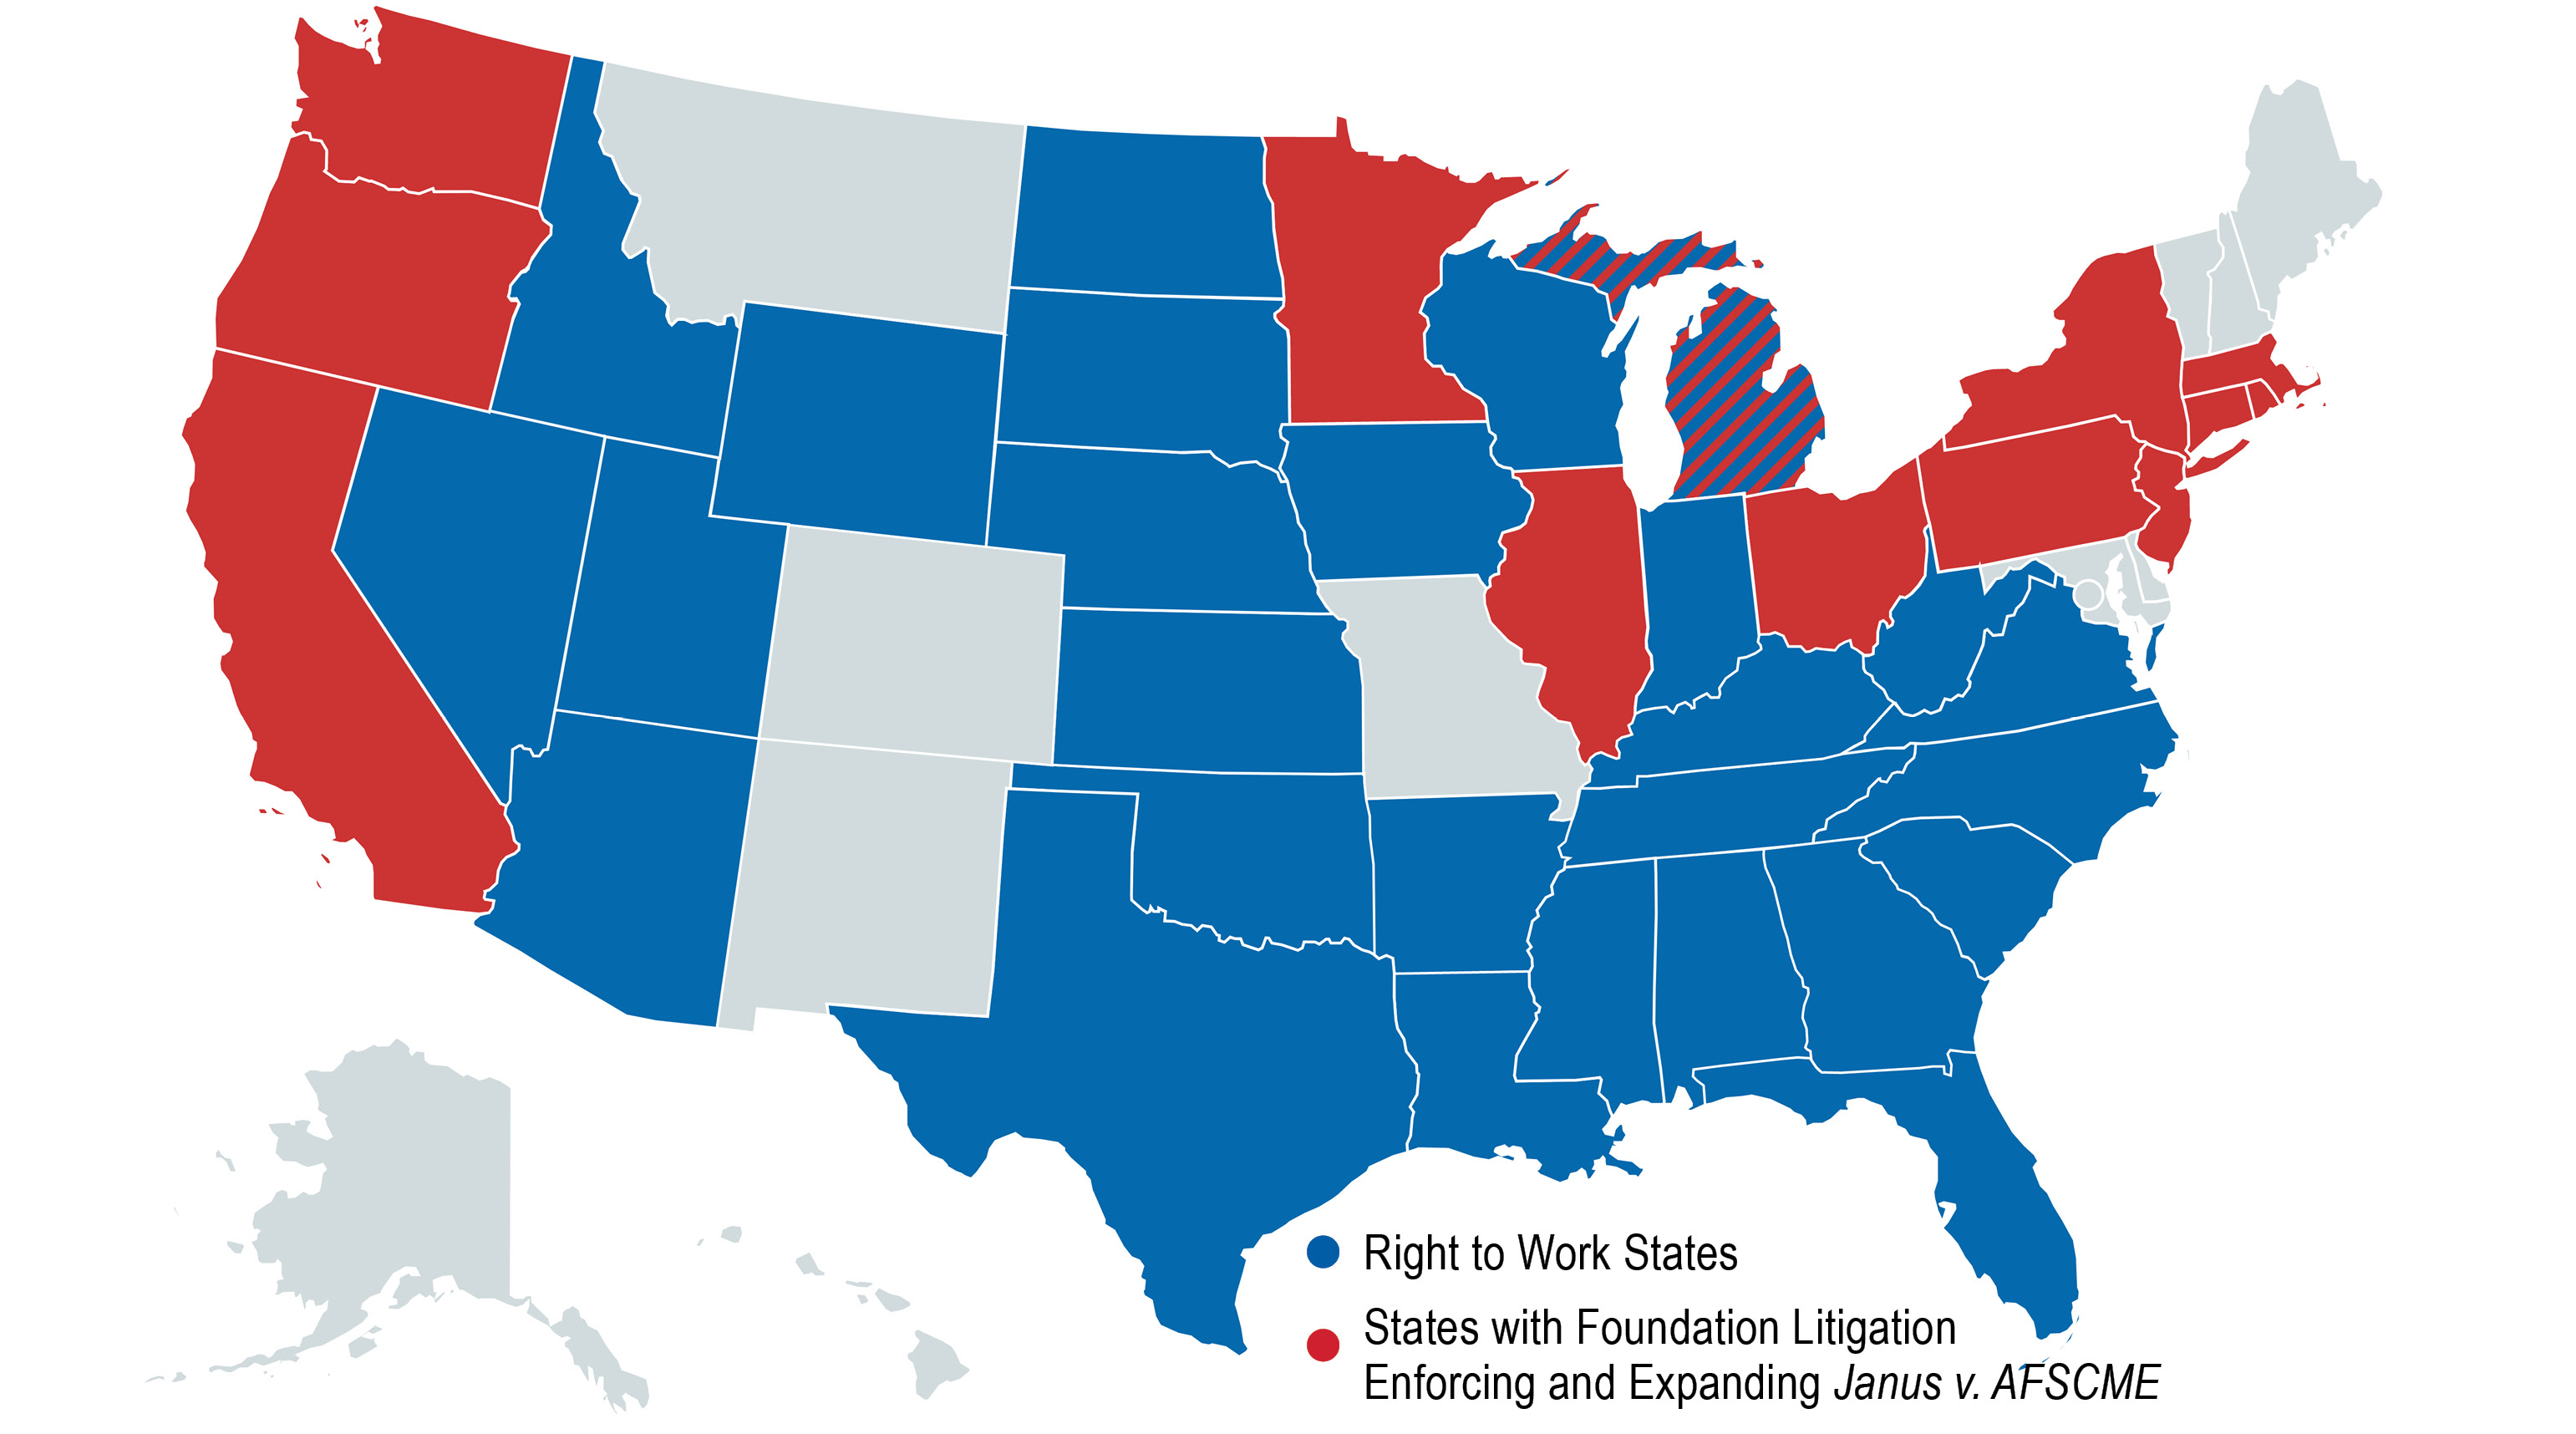 Map of Janus enforcement cases and Right to Work states